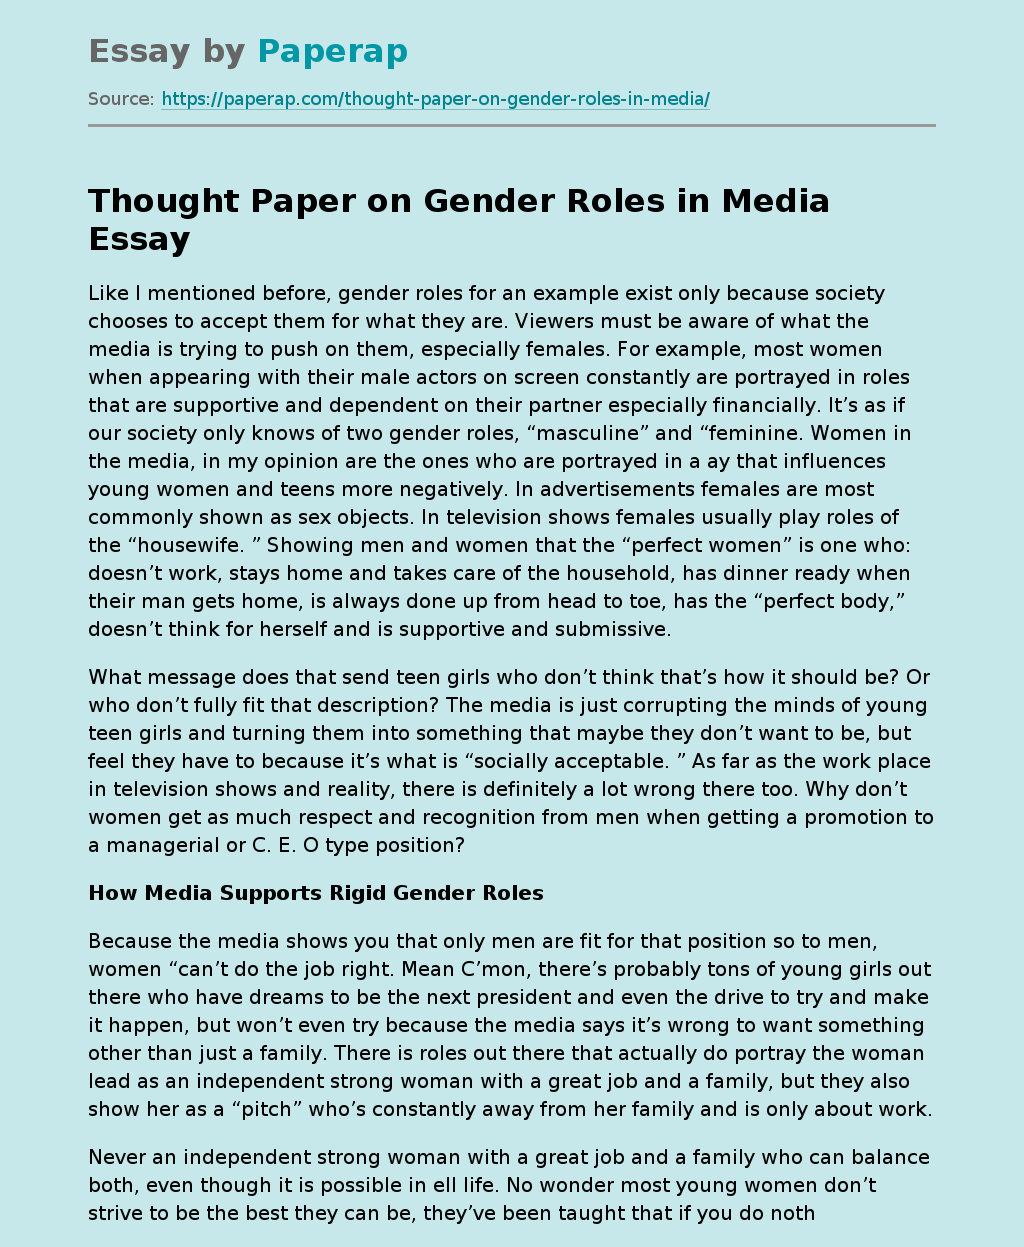 Thought Paper on Gender Roles in Media